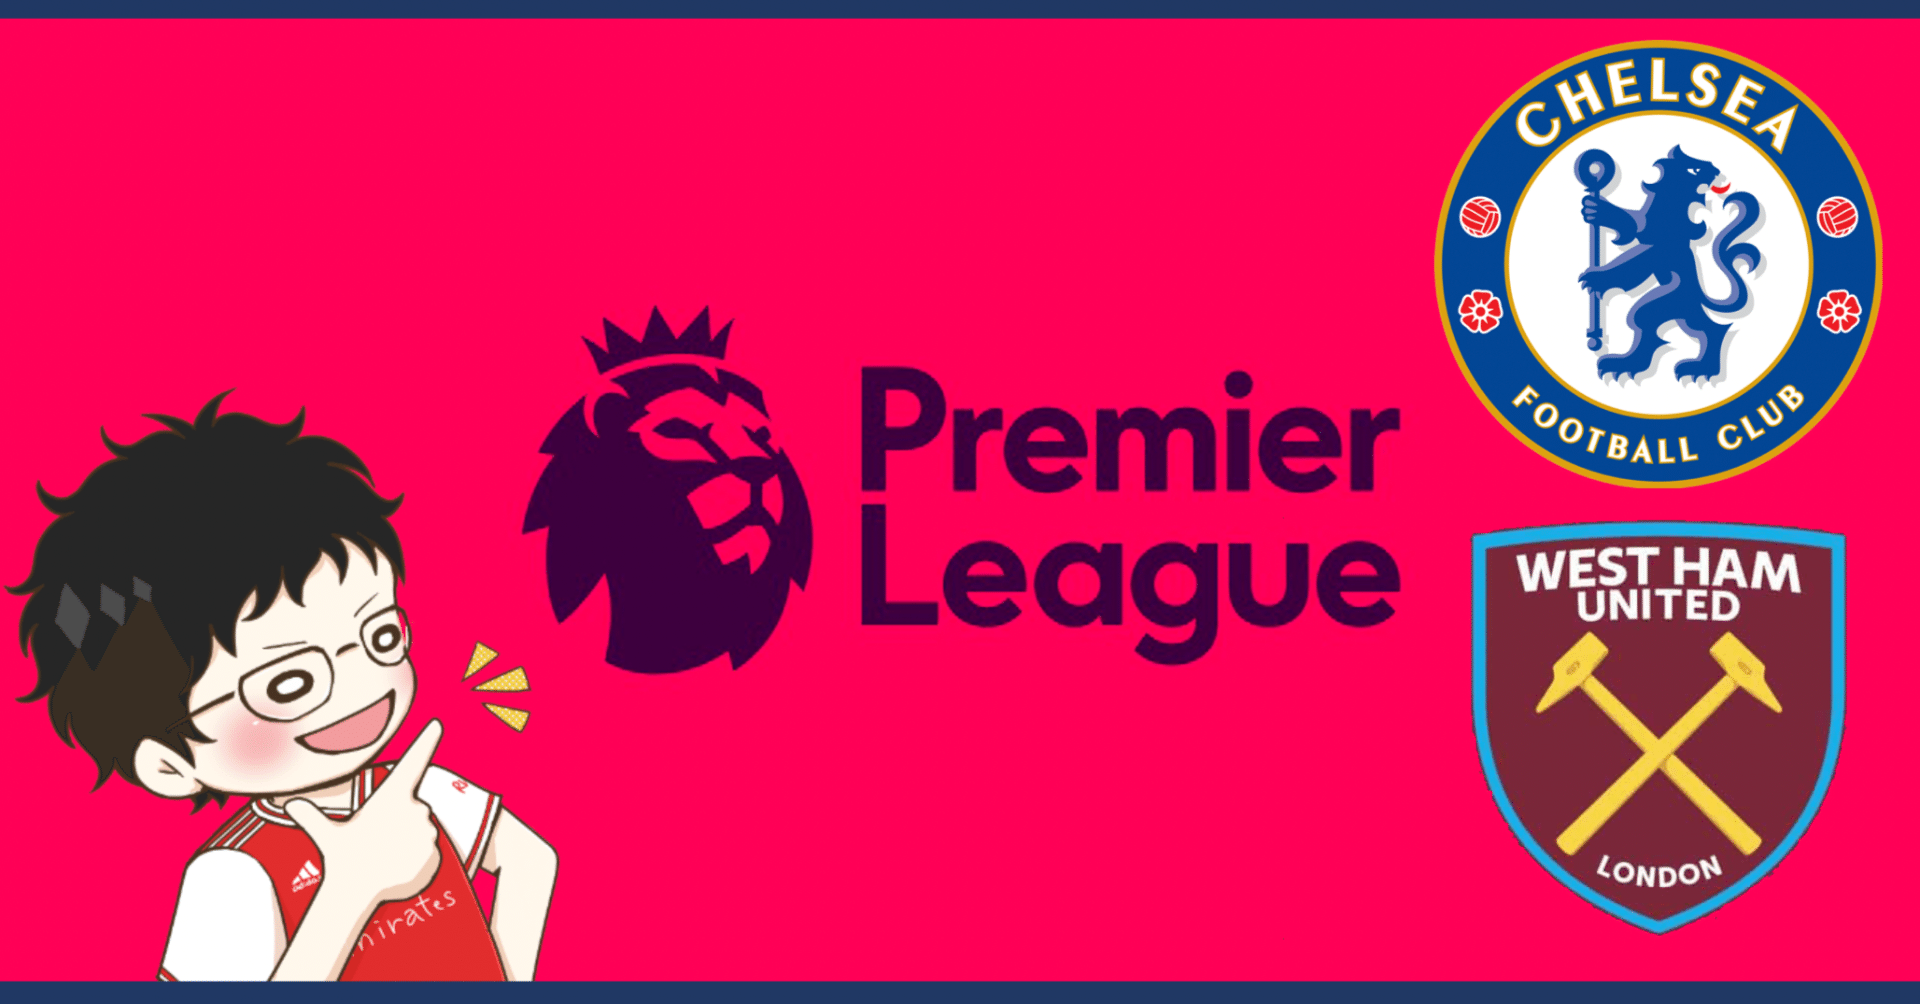 Catch Up Premier League 22 9 4 プレミアリーグ 第6節 チェルシー ウェストハム ハイライト せこ まとめ記事用 Note